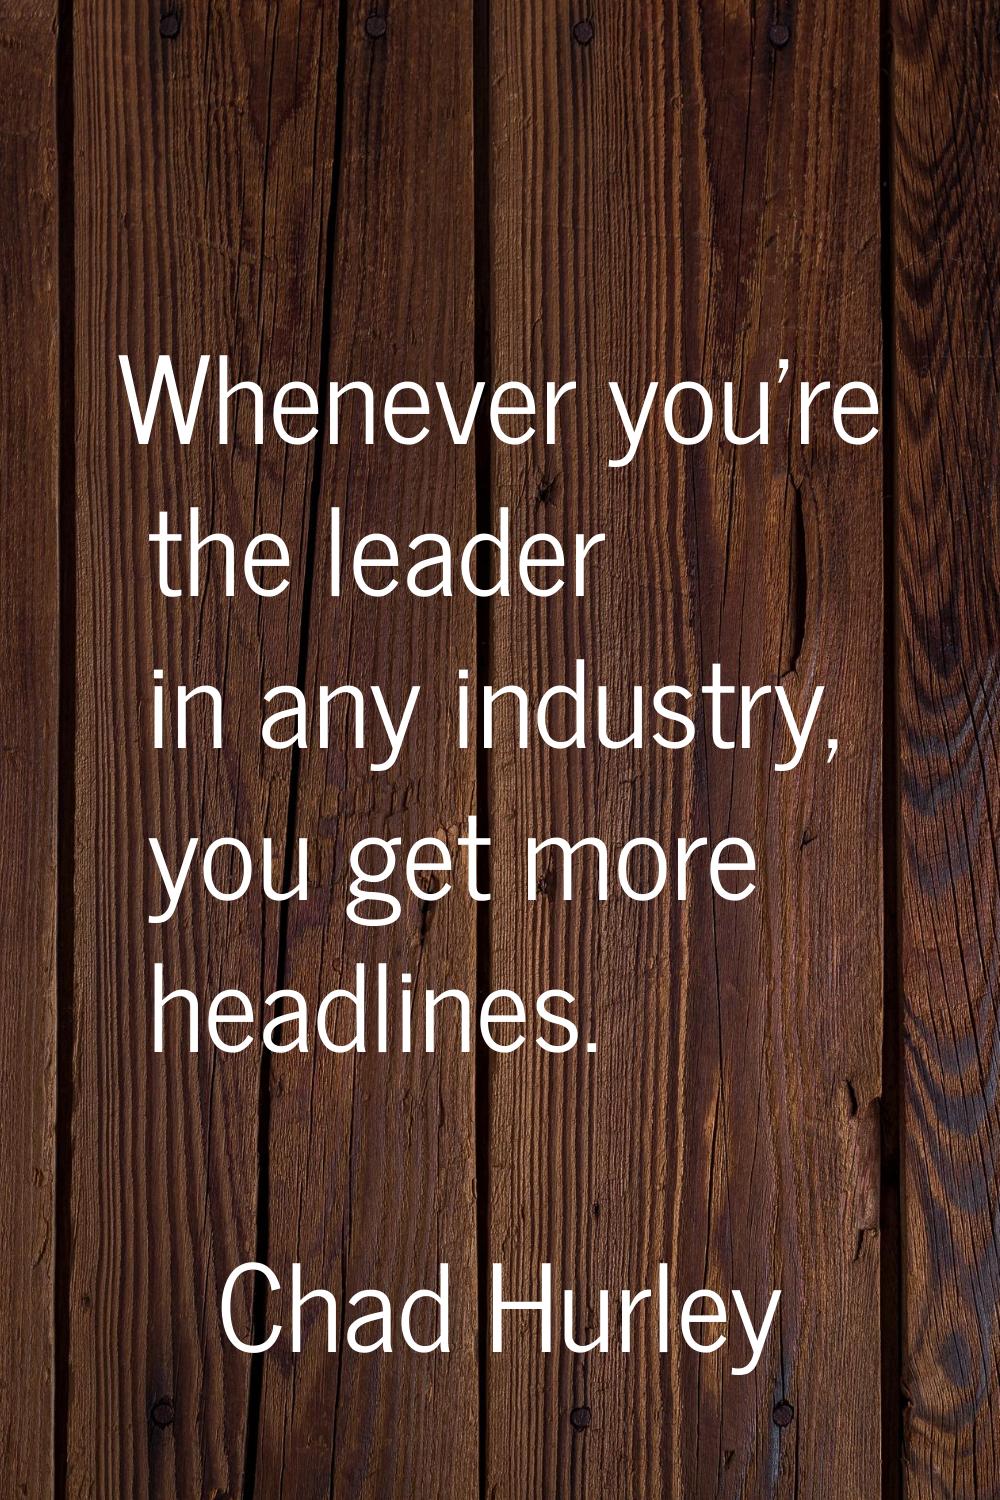 Whenever you're the leader in any industry, you get more headlines.